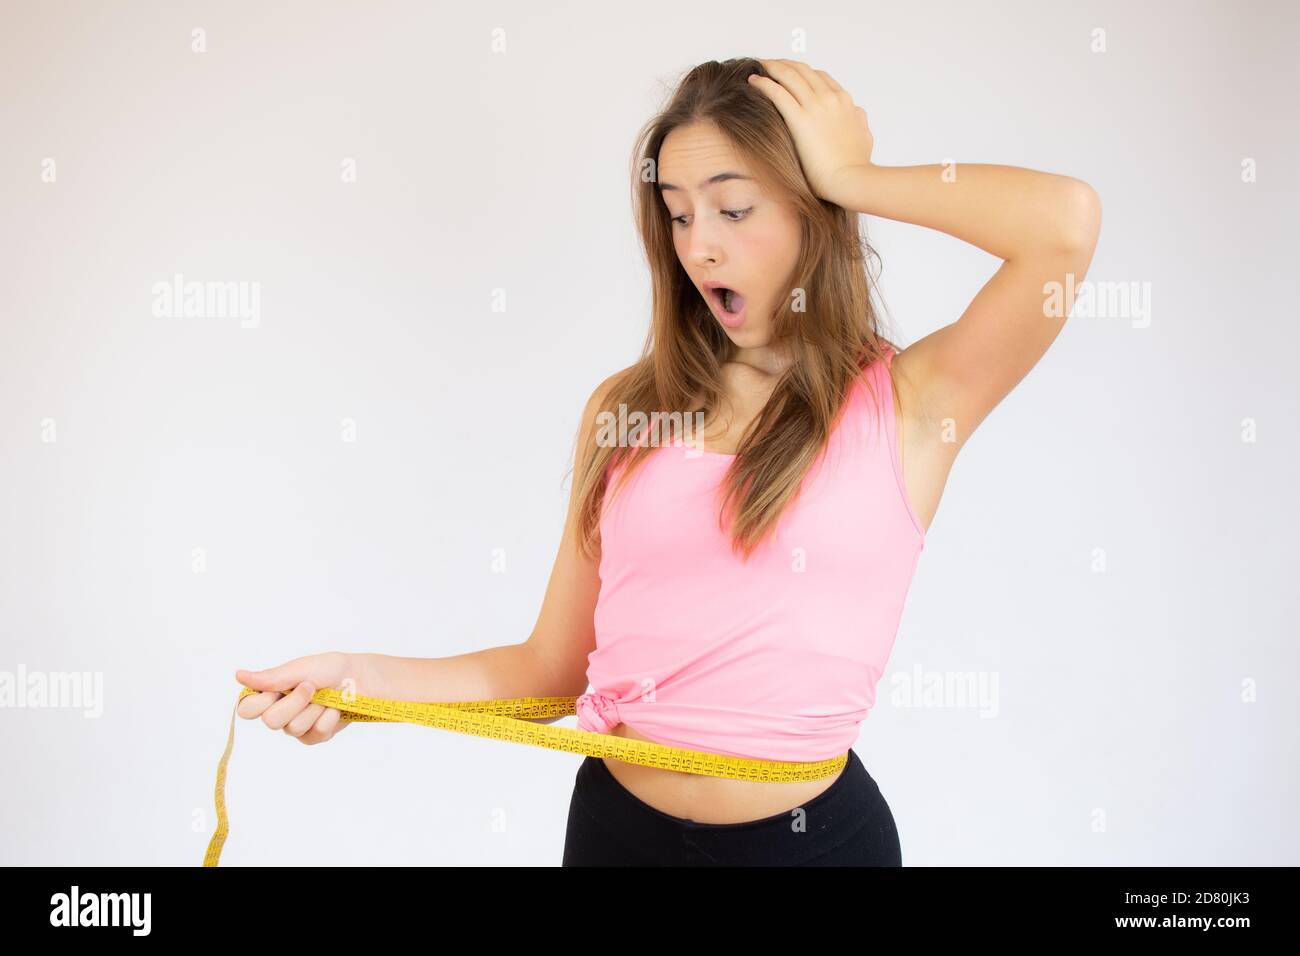 Woman Holds A Measuring Tape Around Her Waist Stock Photo, Picture and  Royalty Free Image. Image 140357555.